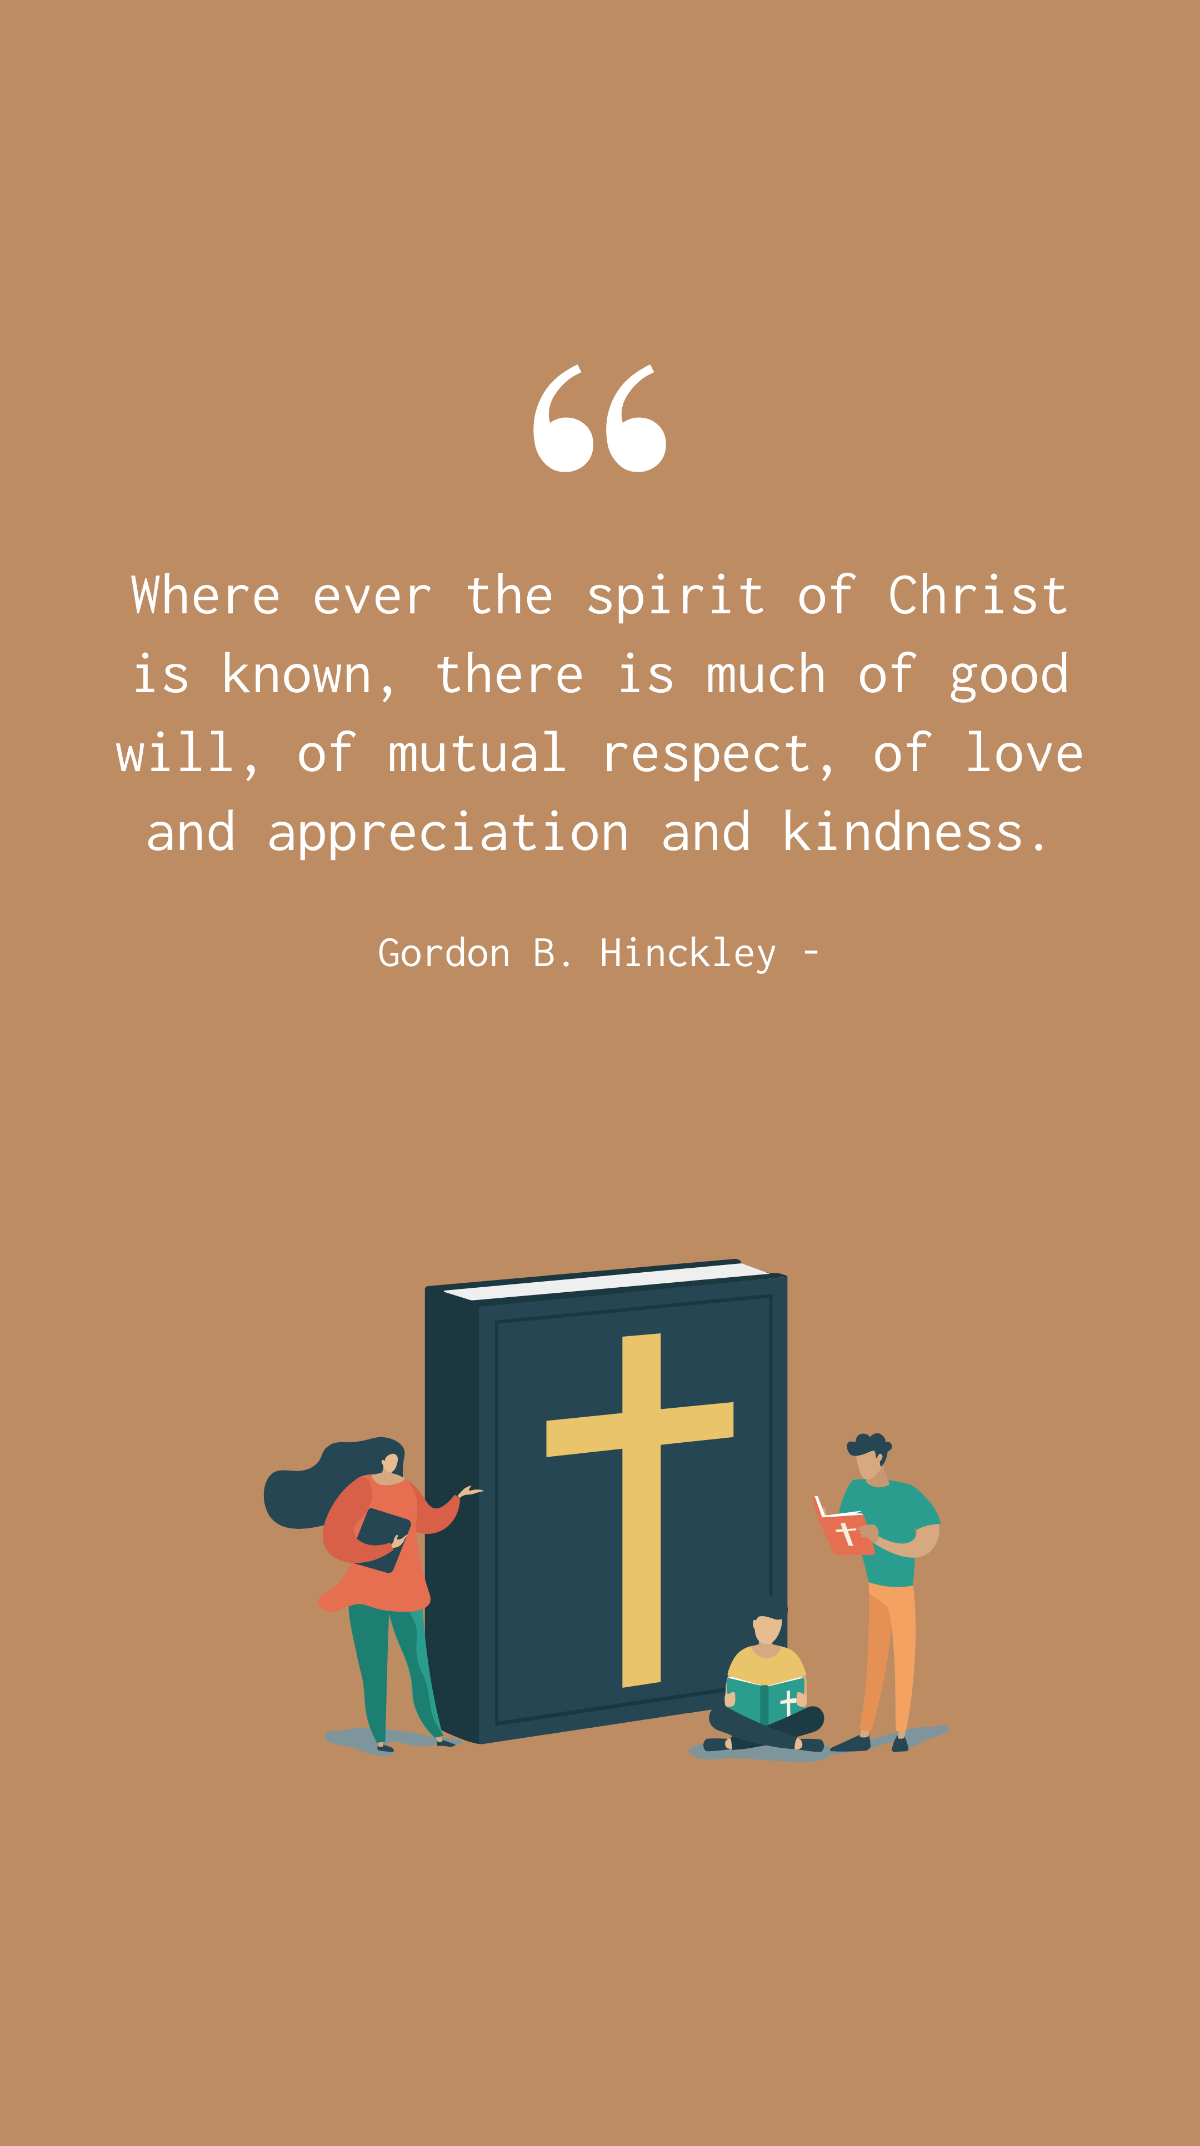 Gordon B. Hinckley - Where ever the spirit of Christ is known, there is much of good will, of mutual respect, of love and appreciation and kindness. Template